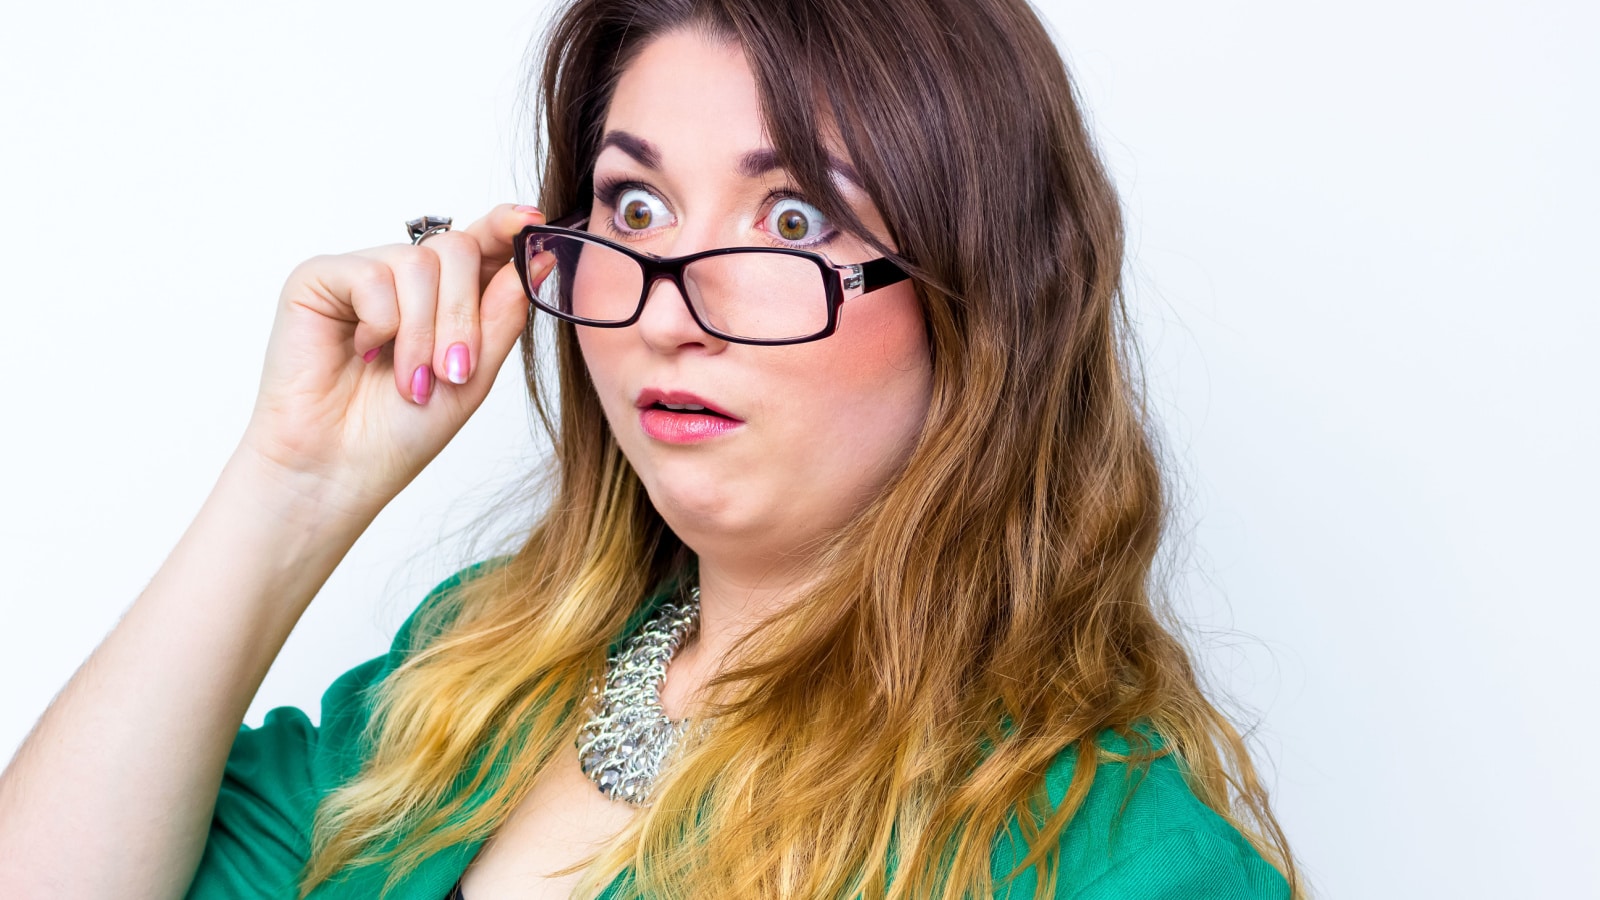 woman surprised can't believe her eyes